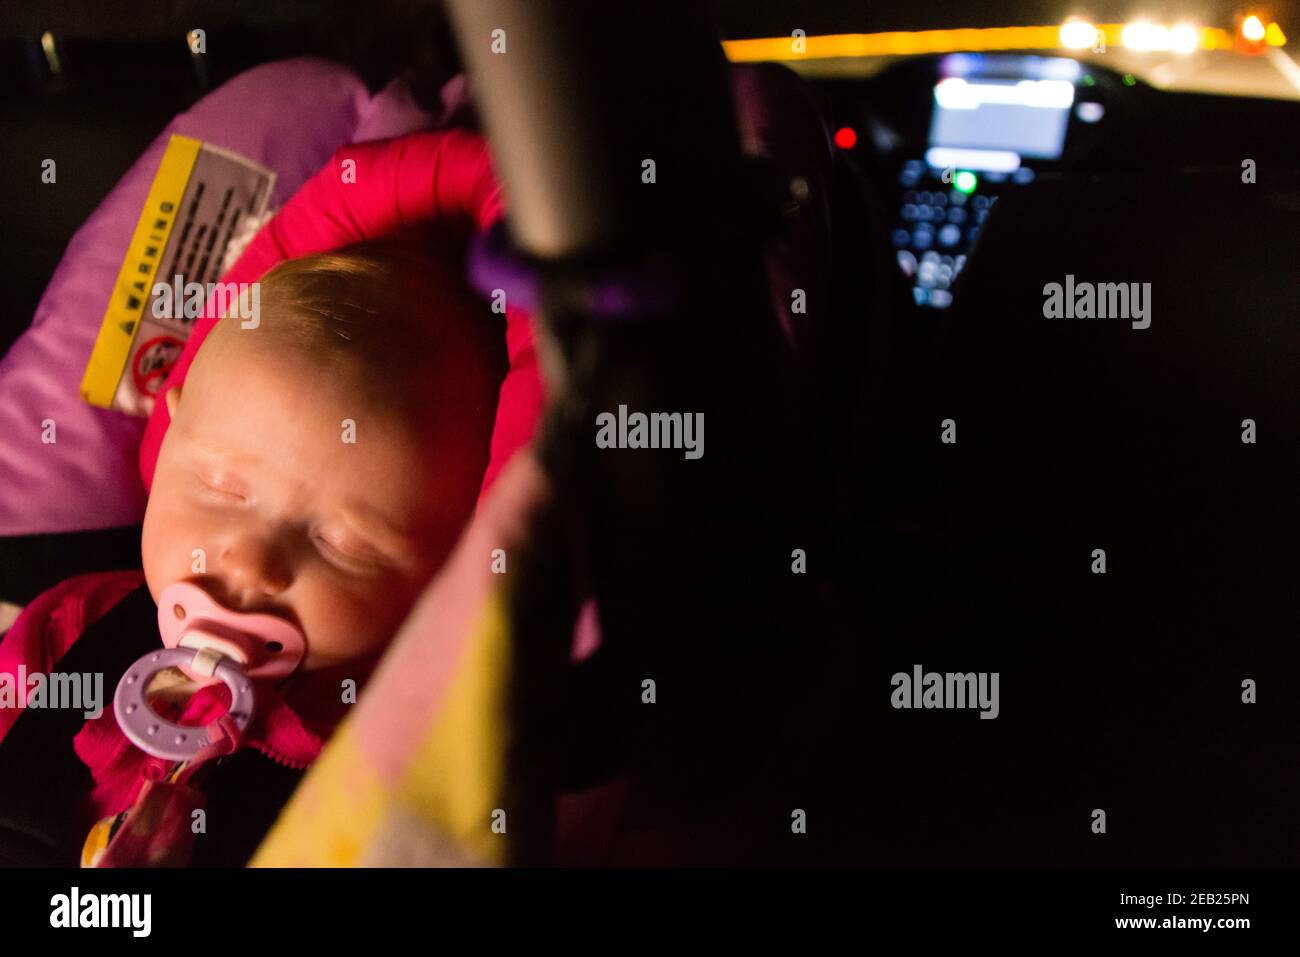 Five-month-old baby asleep in a car seat during a night drive. Stock Photo